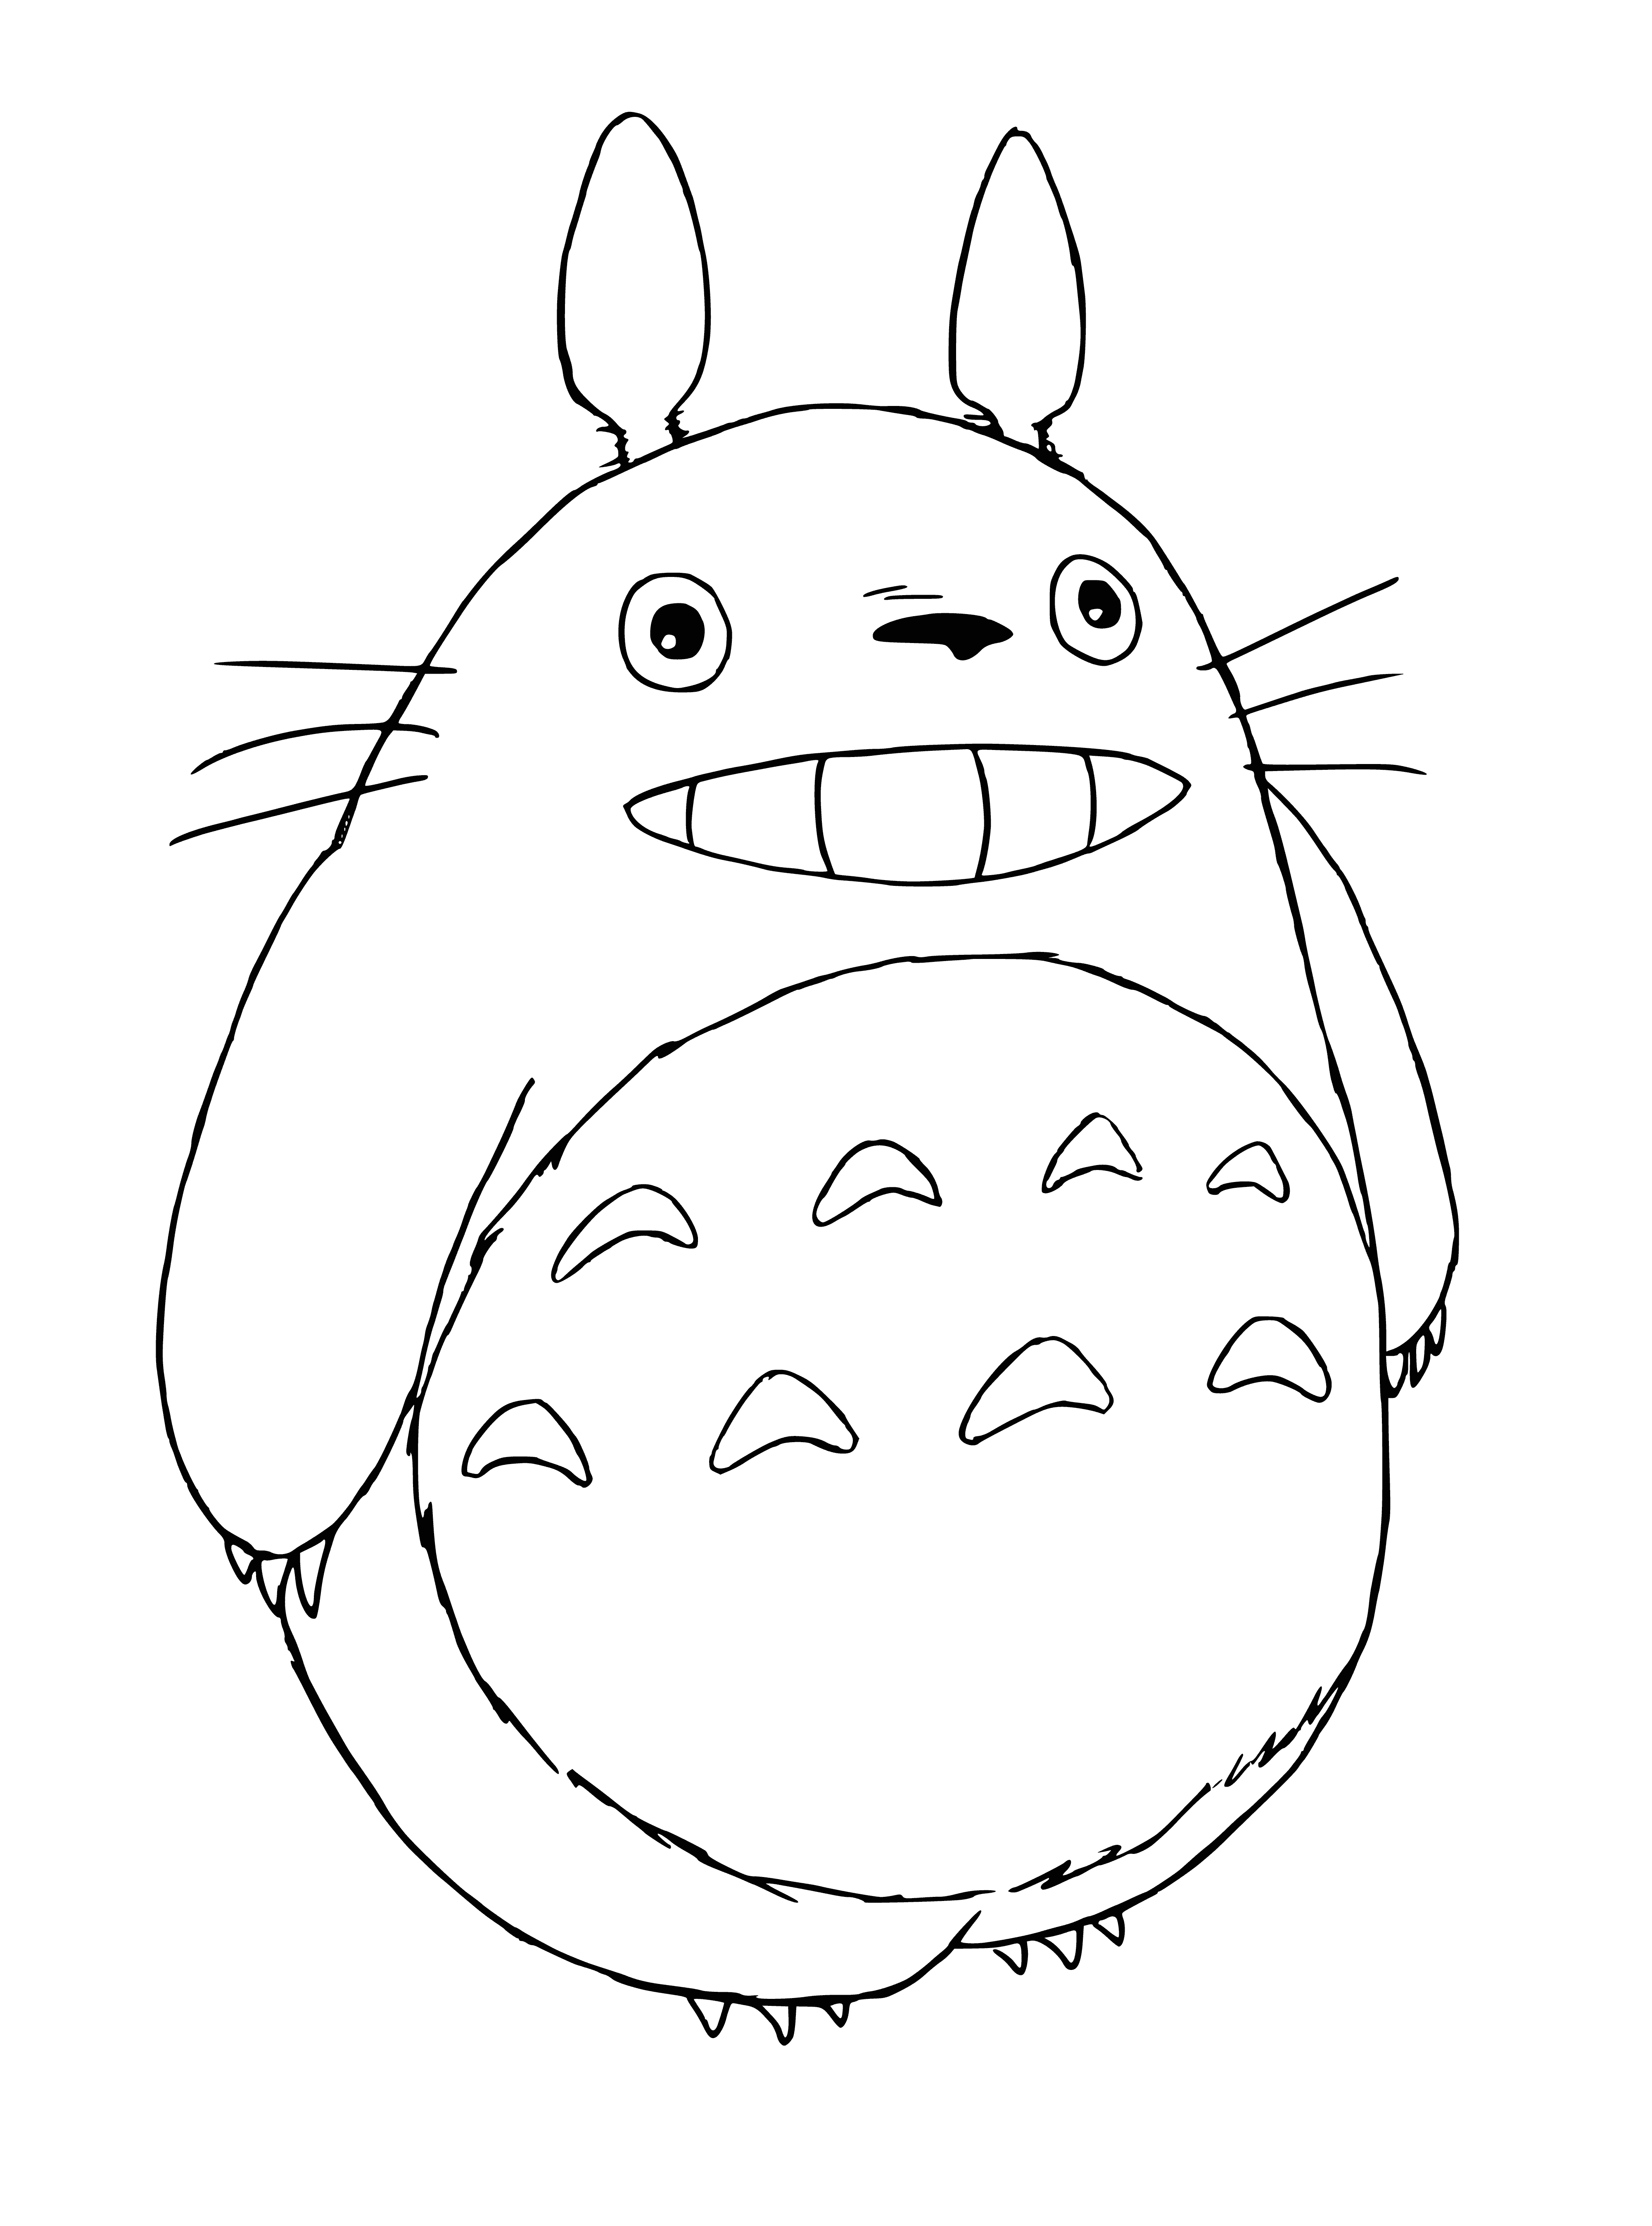 coloring page: Girl cuddling happy, large rabbit-like creature under tree in mystical forest. Its round eyes, furry ears & tail curled around her.